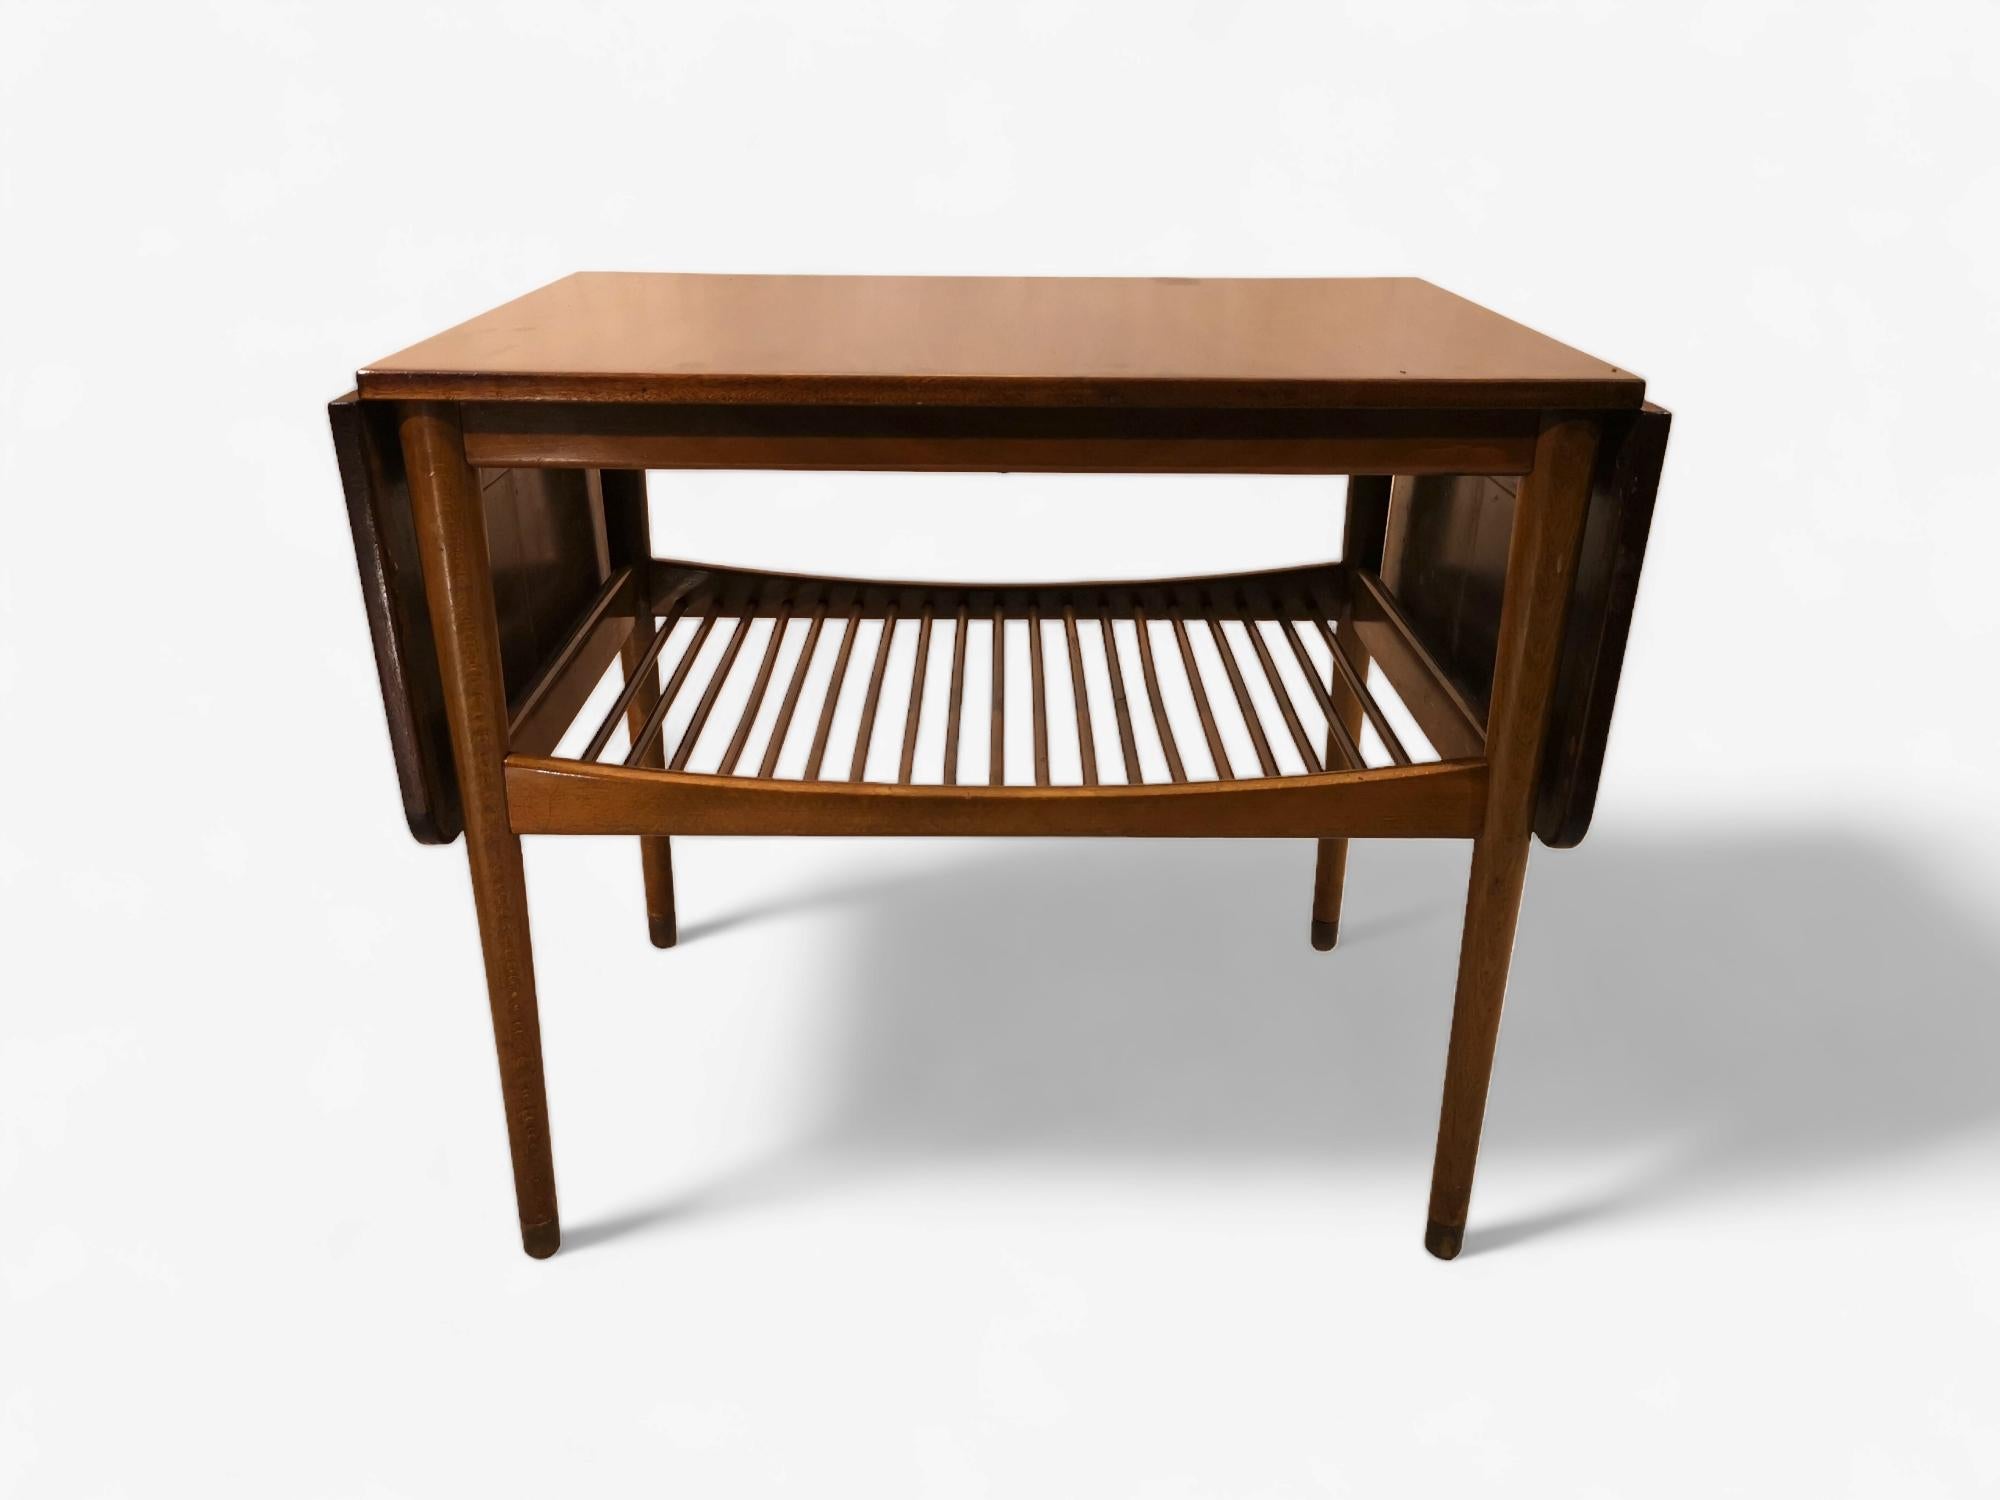 Finn Juhl coffee table with underlying shelf and 2 extensions. 
The table top is walnut, the frame, the legs are made of beech and the legs are finished with brass shoes.

Length with both extension out 124 cm